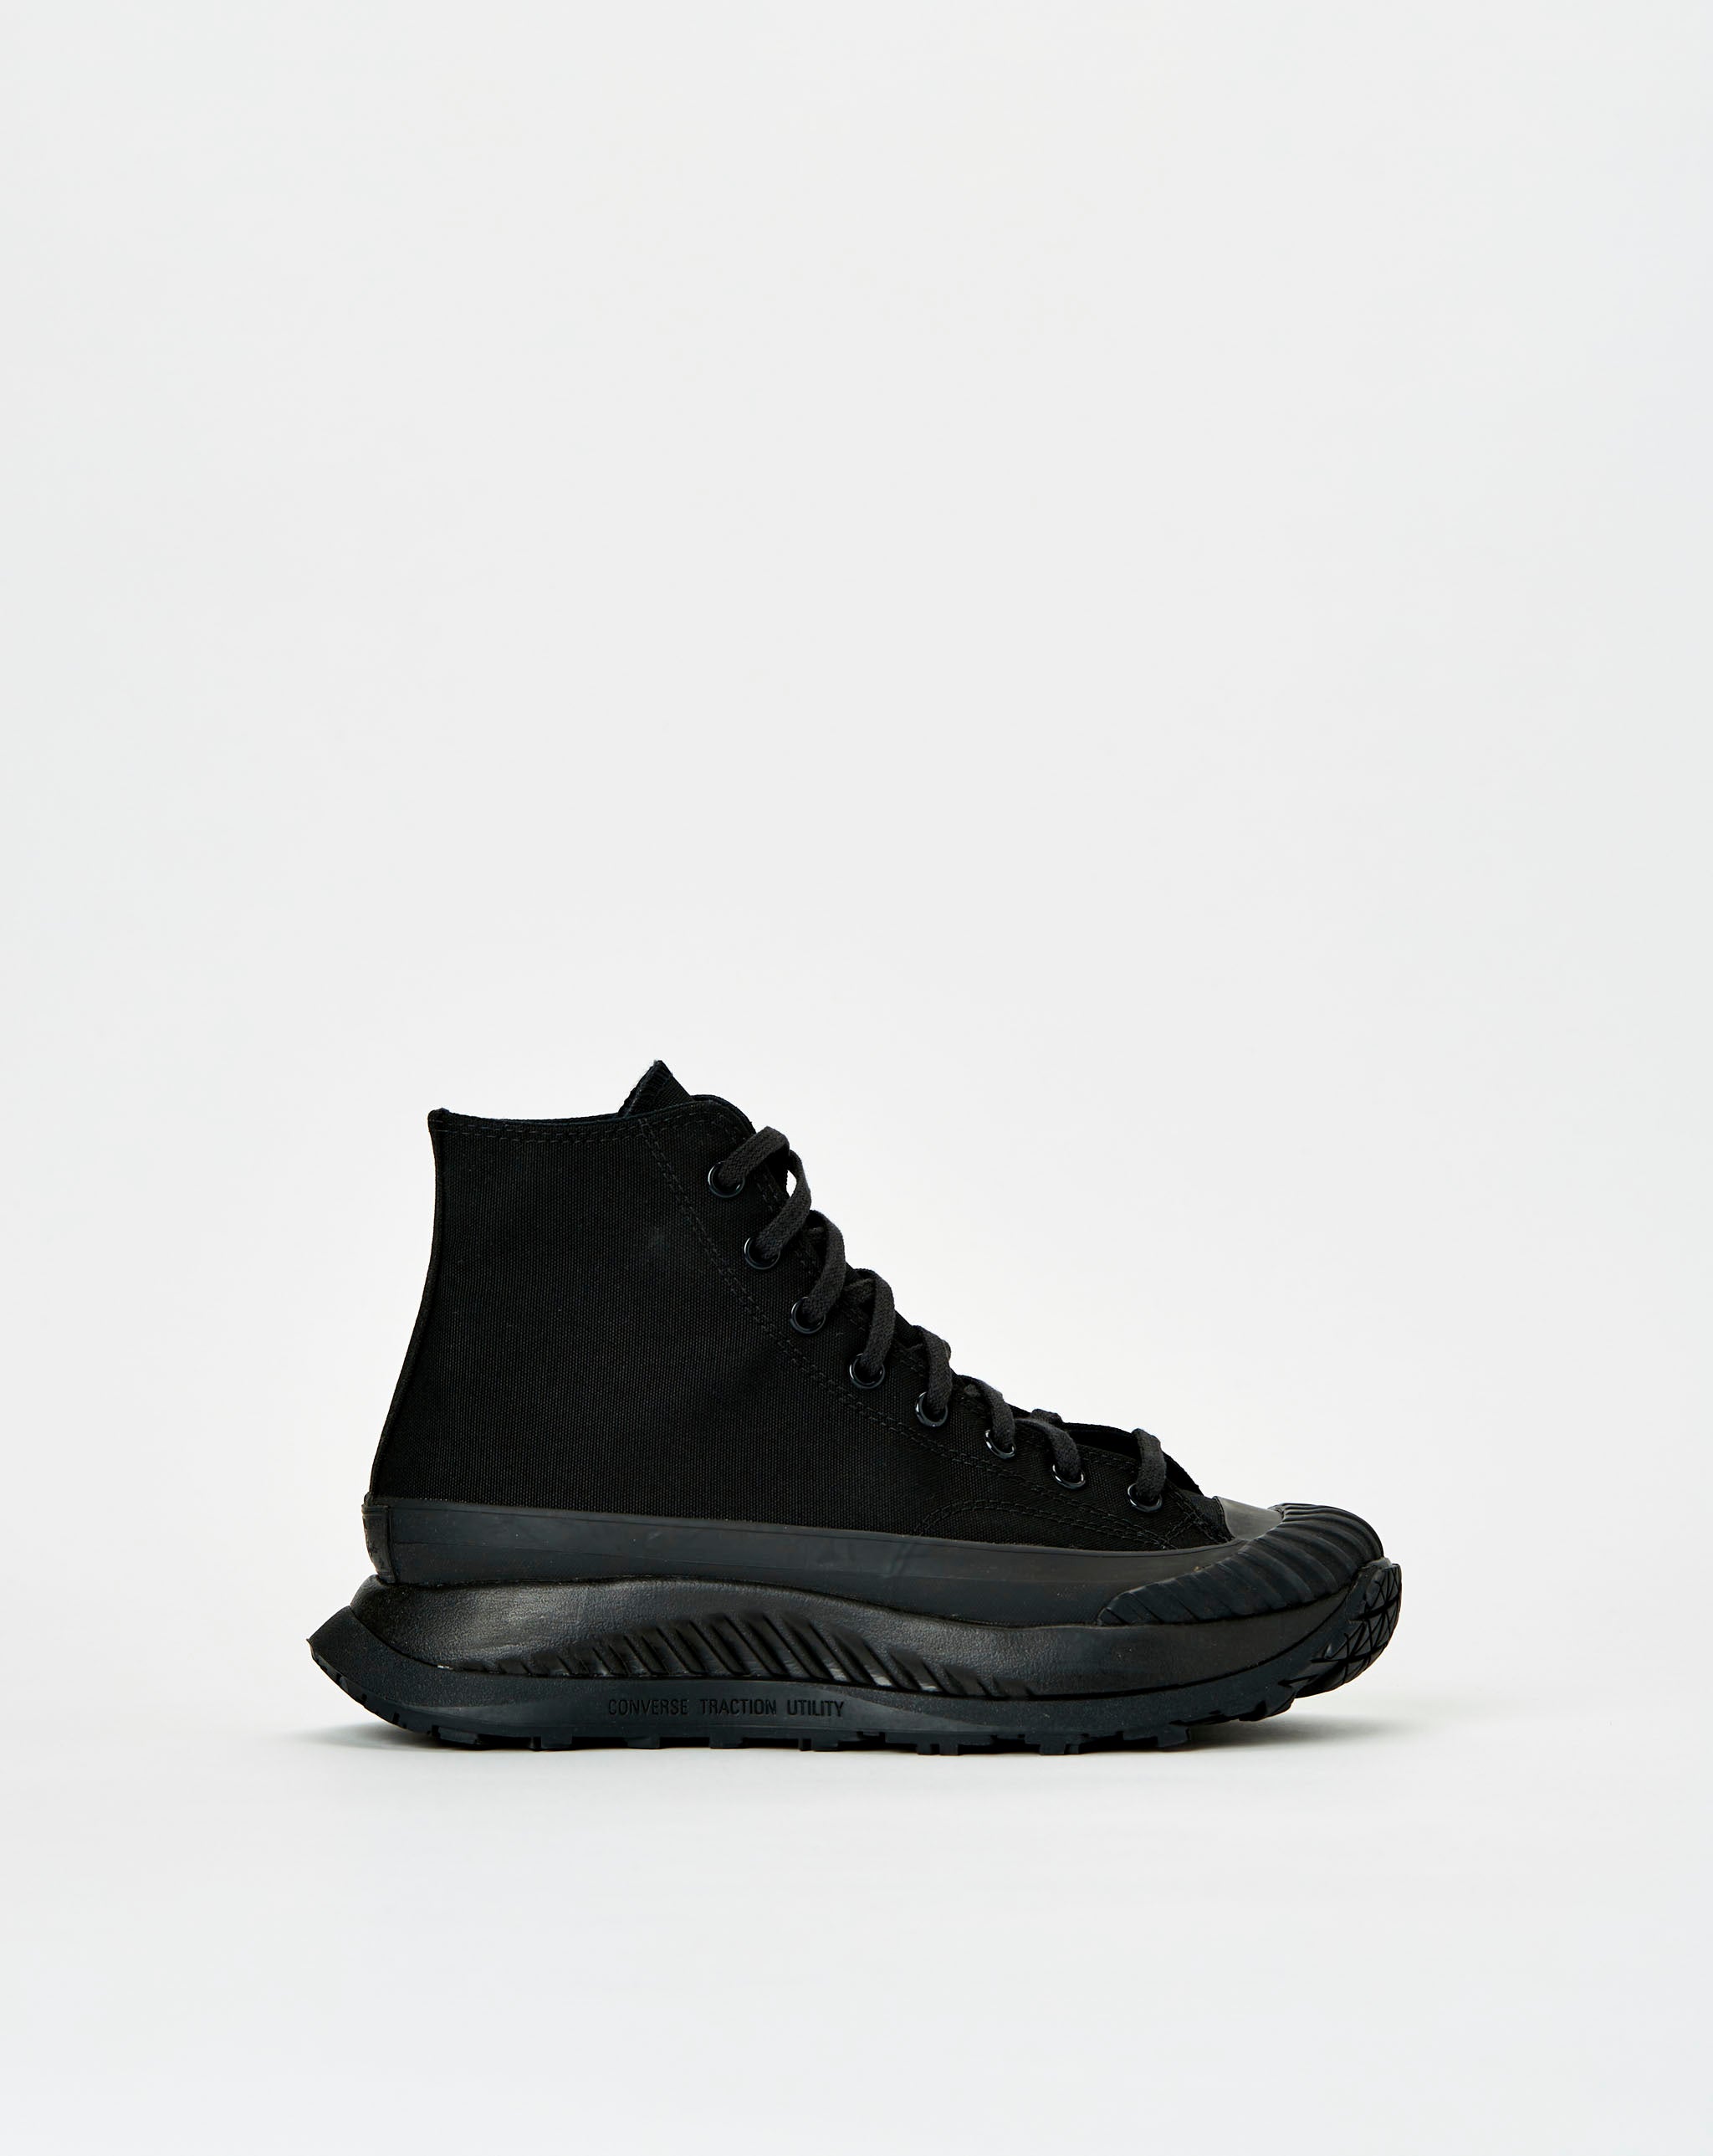 Converse Super comfy ankle boots with side zip and lace up front  - Cheap Erlebniswelt-fliegenfischen Jordan outlet